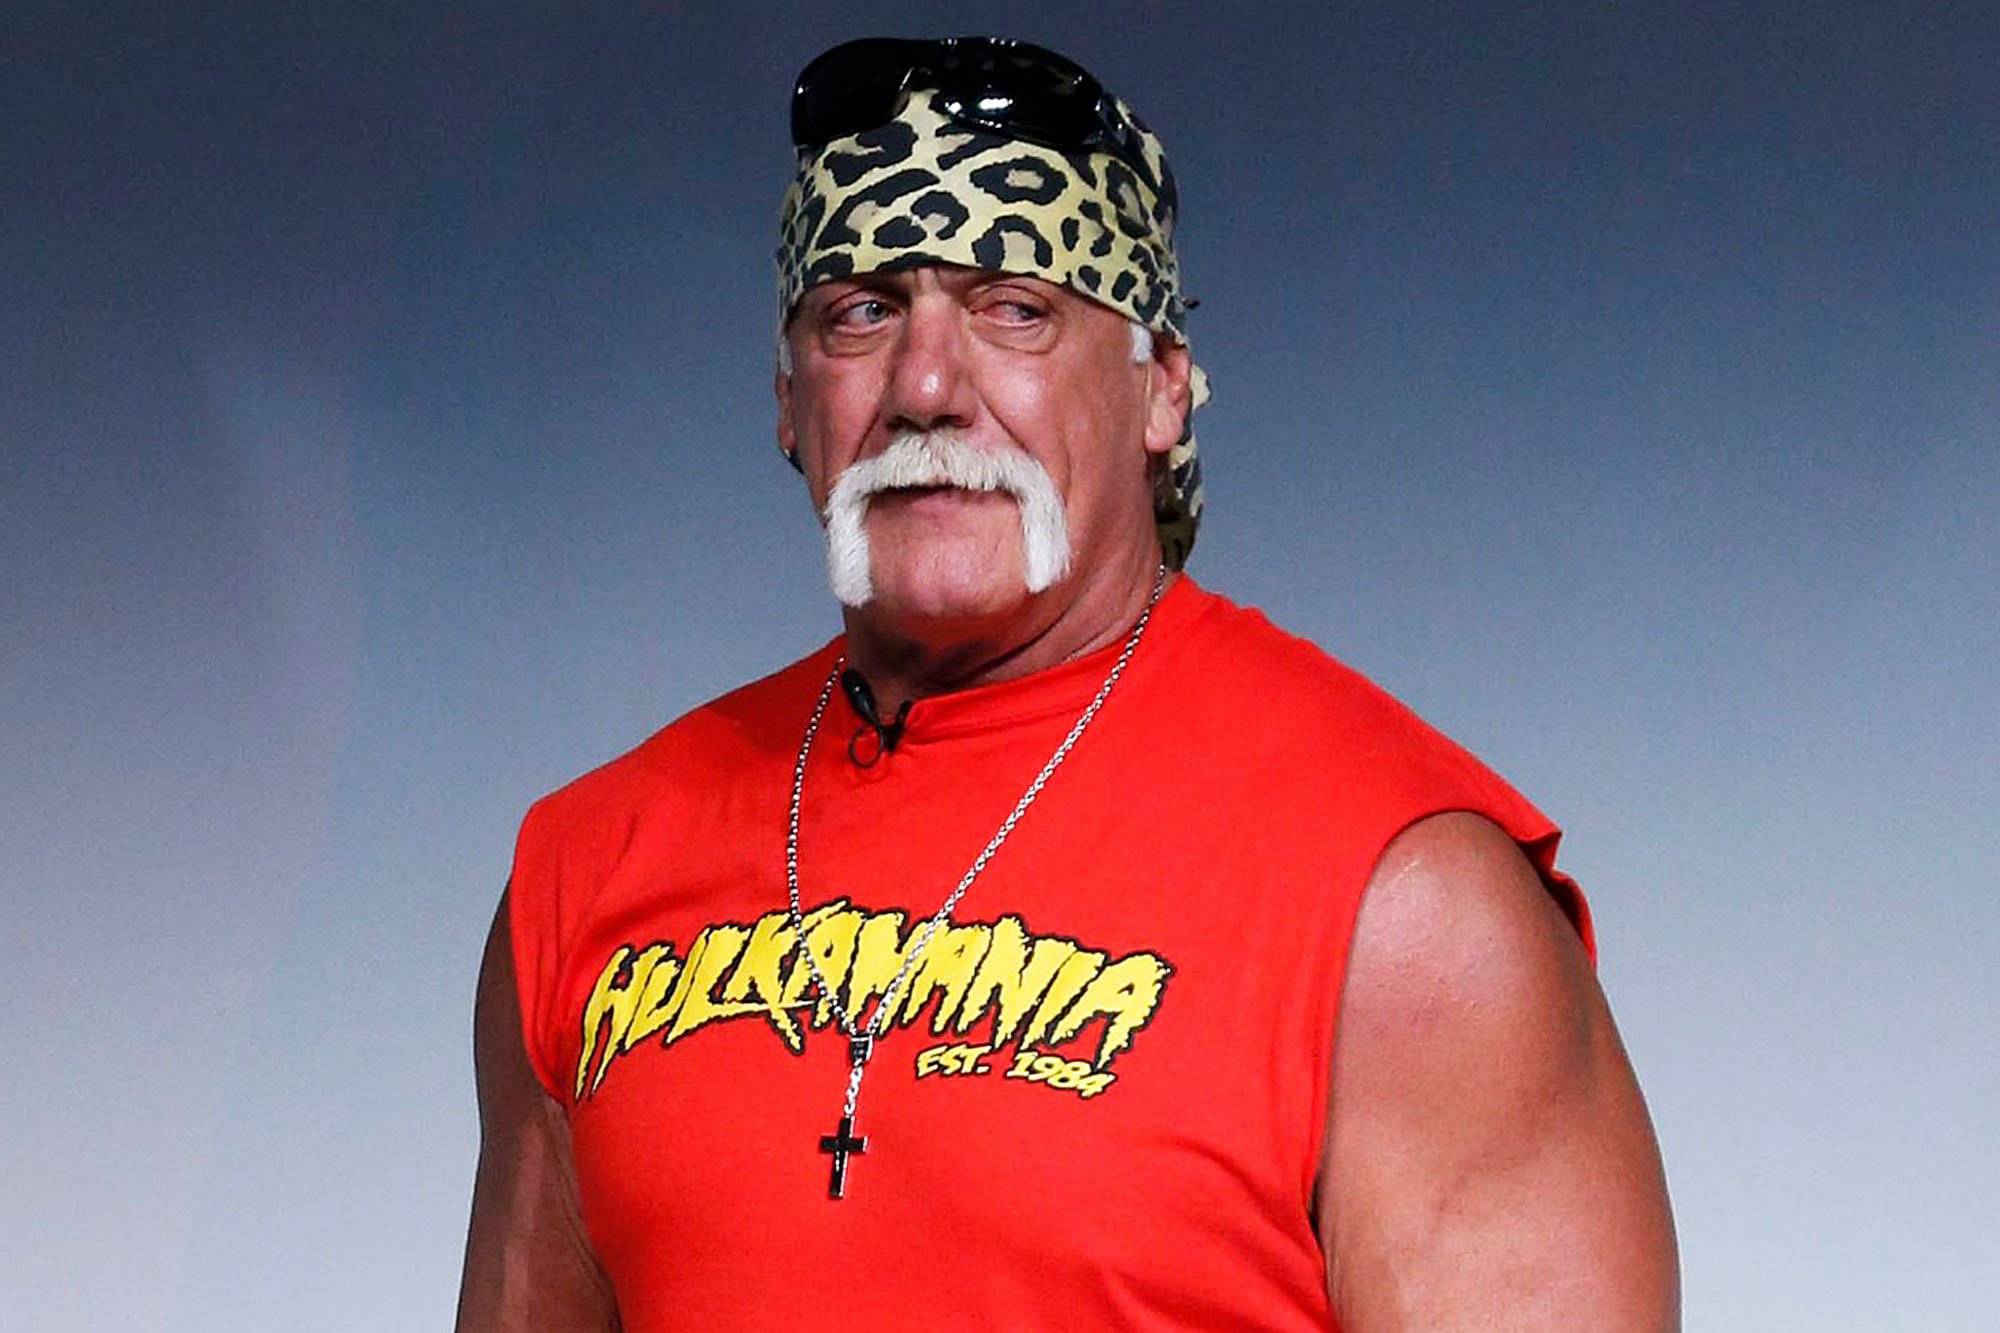 Hulk Hogan on if he's angling for a match at WrestleMania 31, If he is